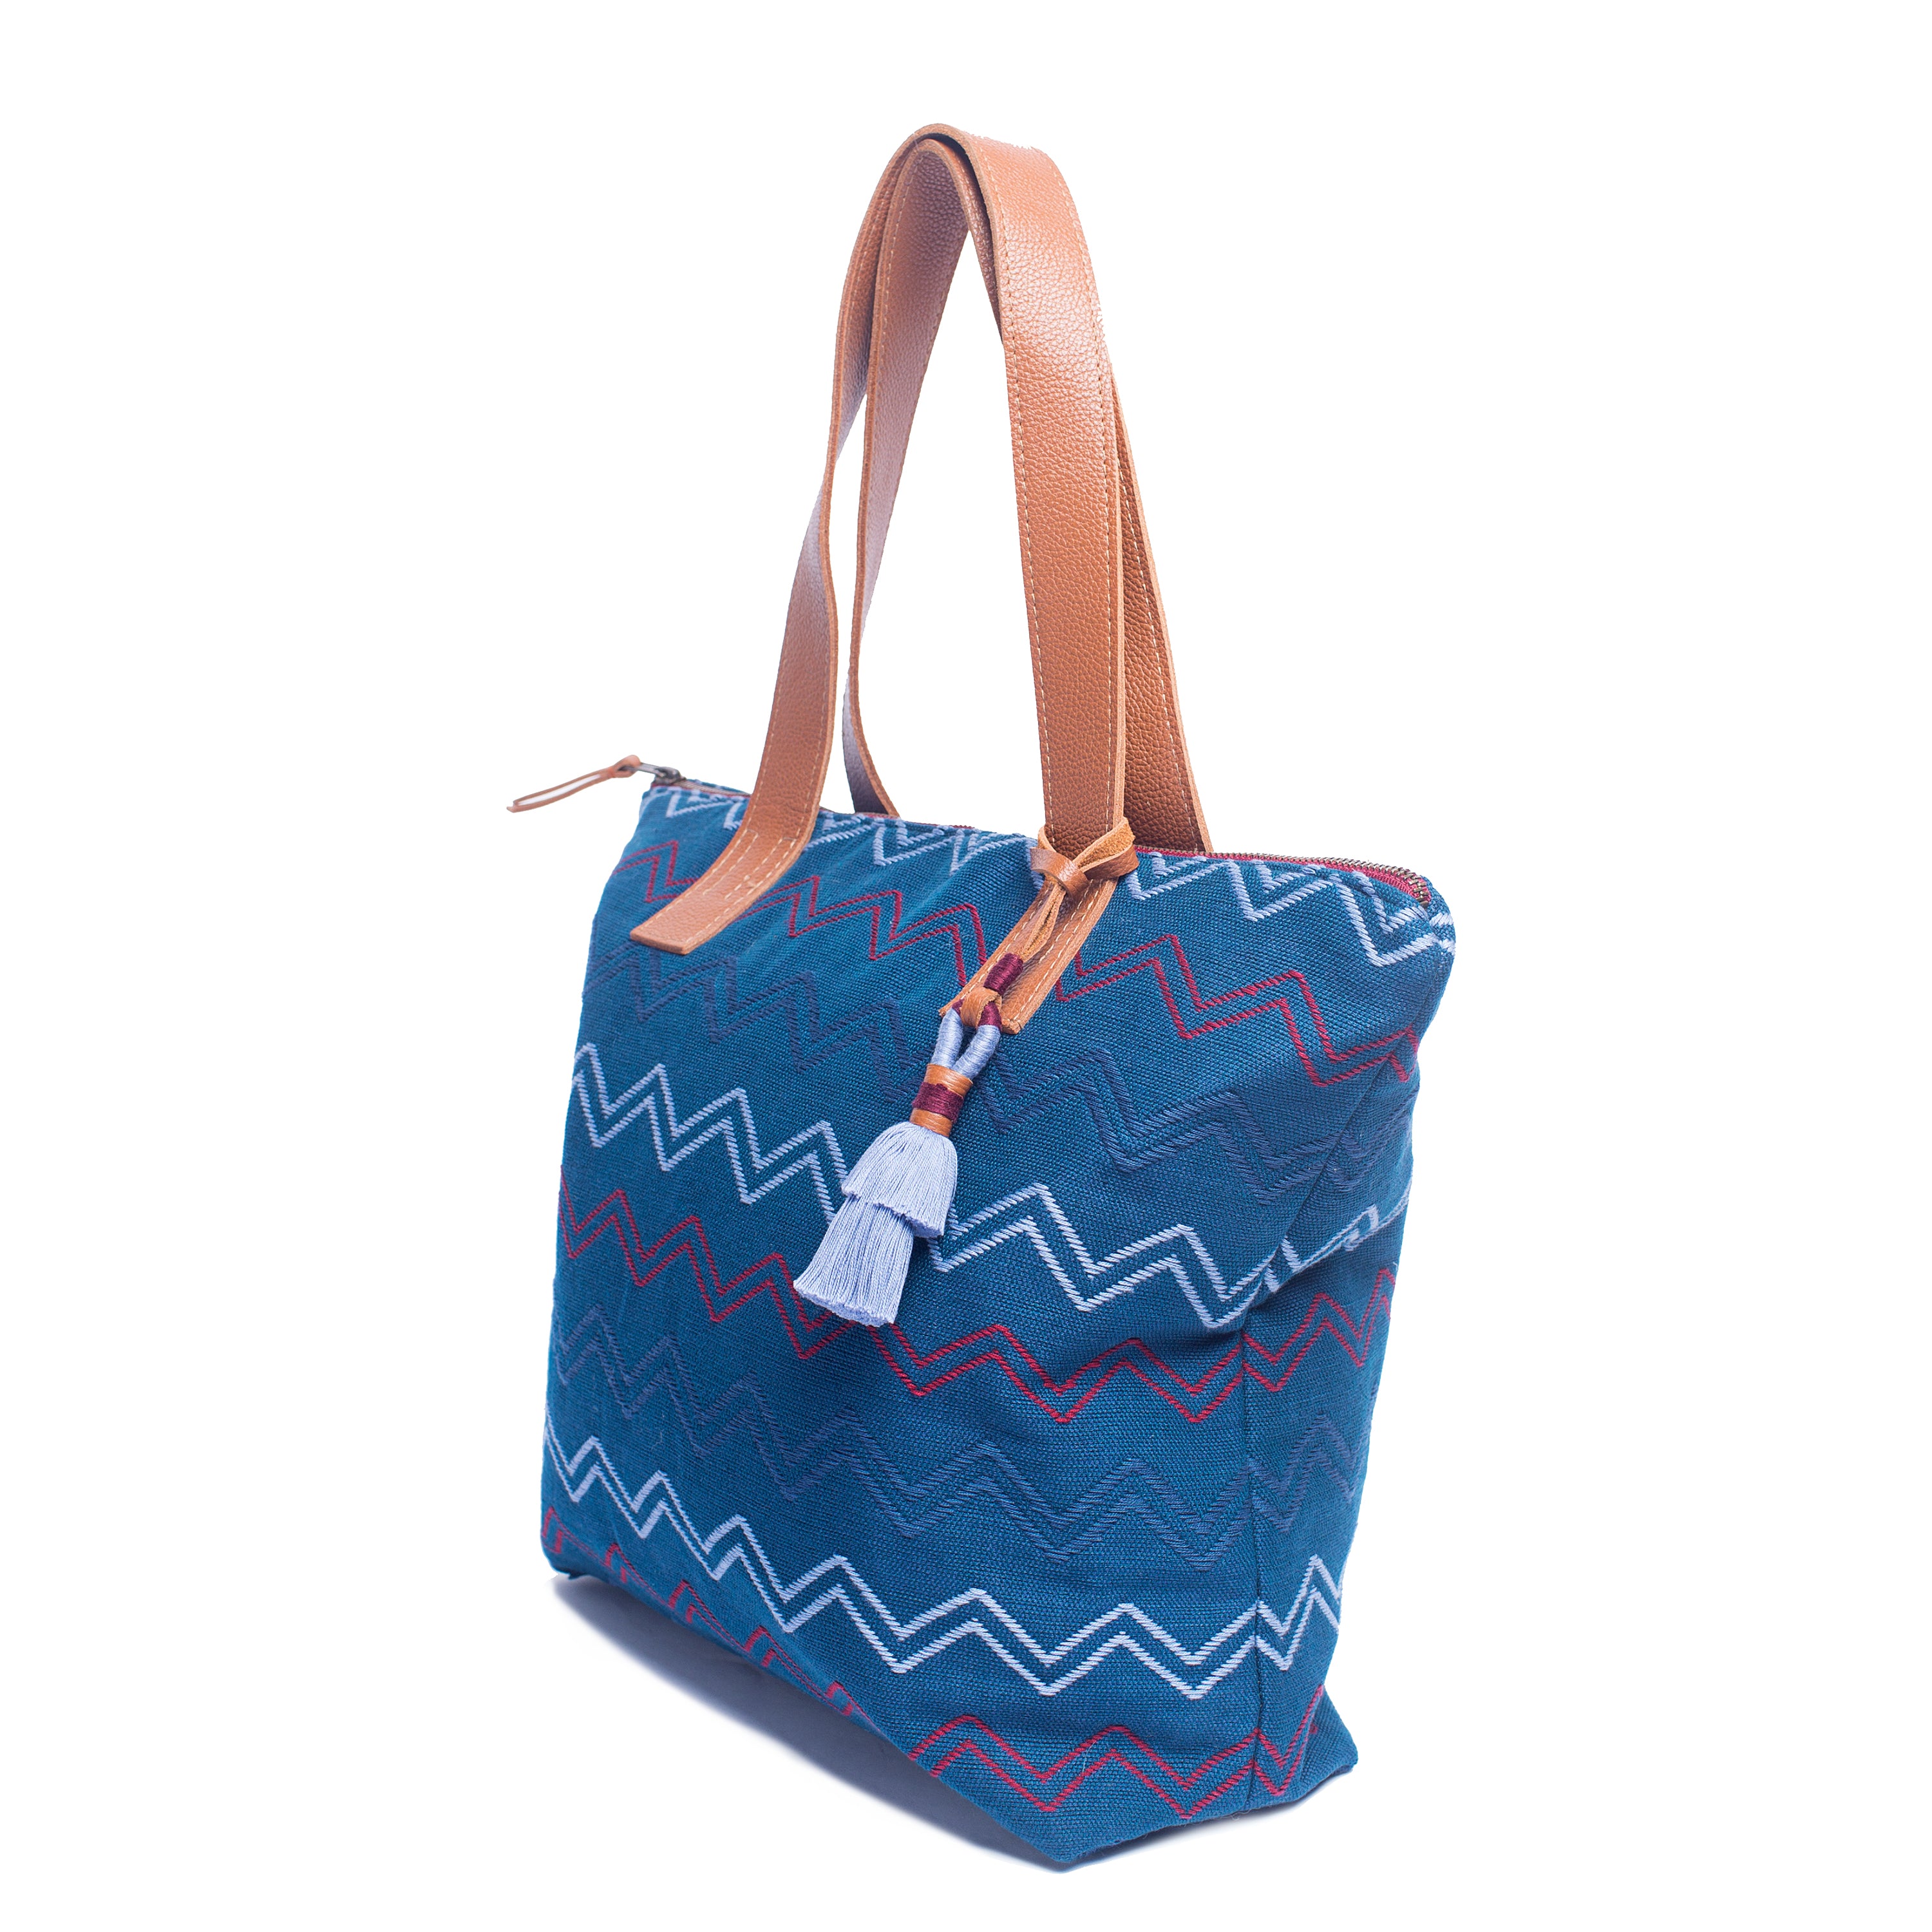 The right-sided angle of the Angela Handwoven Tote in Lake Ripple pattern. It has horizontal zigzag stripes in red, light blue, and blue over a blue background. It has a blue tassel and leather handles.